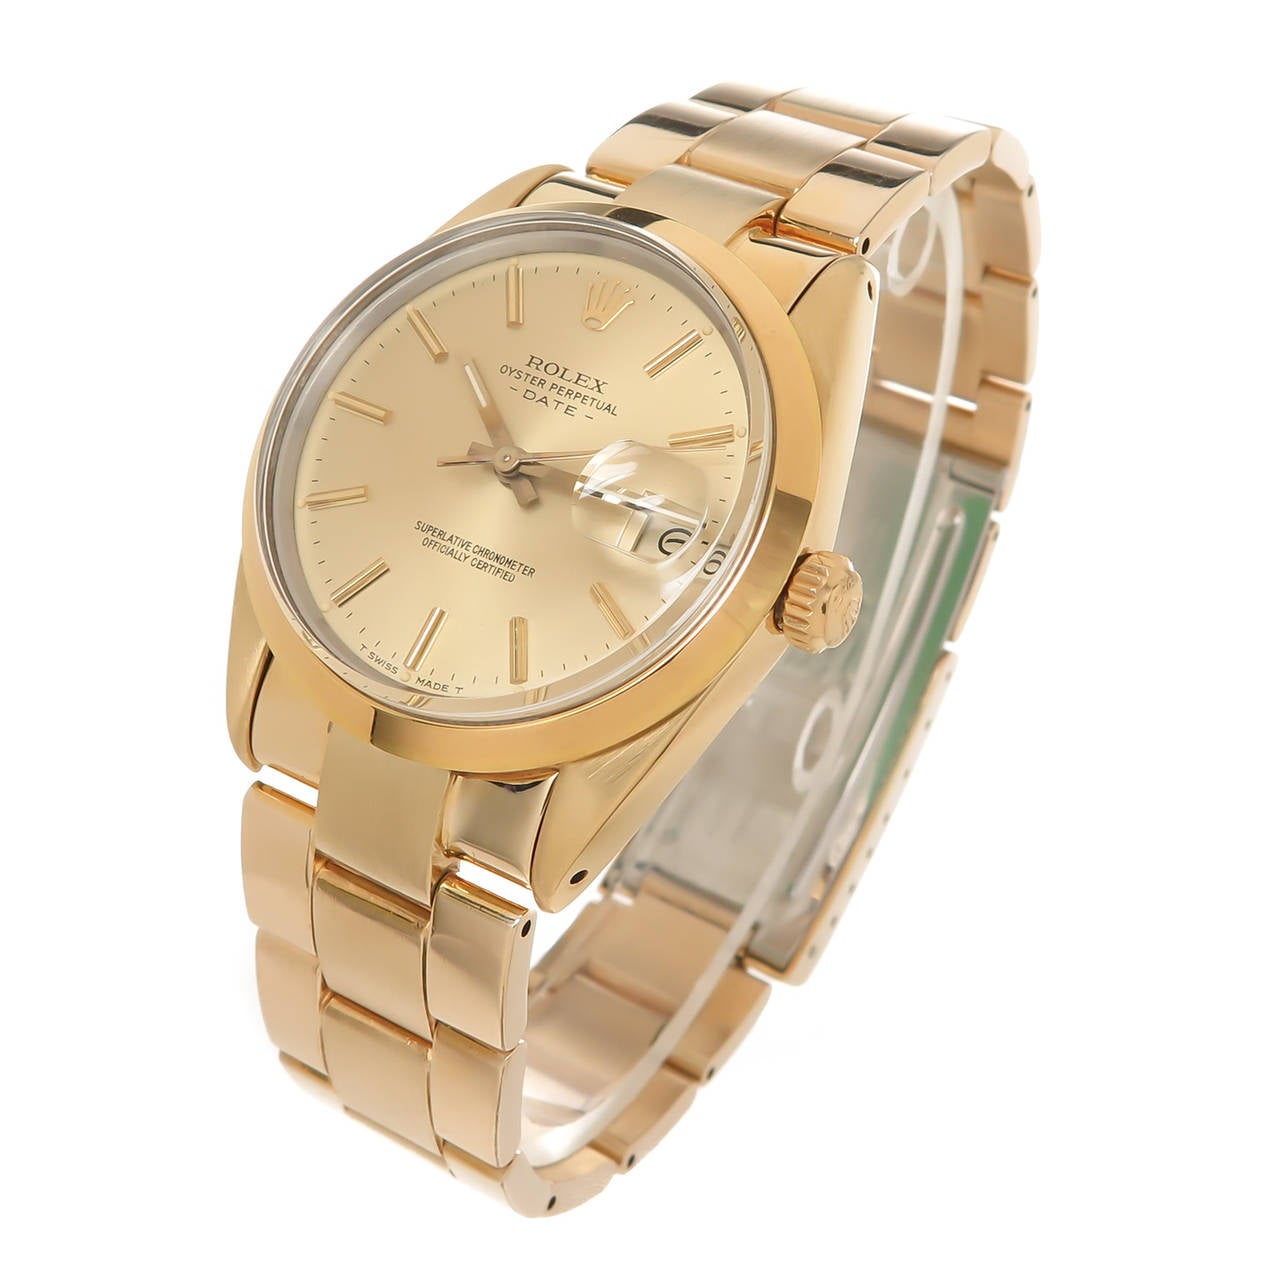 Circa 1985 Rolex Reference 15505 14K yellow Gold Shell Wrist Watch, 34 MM water proof case with Steel back and smooth Bezel. Caliber 3035, automatic, self winding movement. Gold Dial with Raised Gold markers and Calender window at the 3 position.